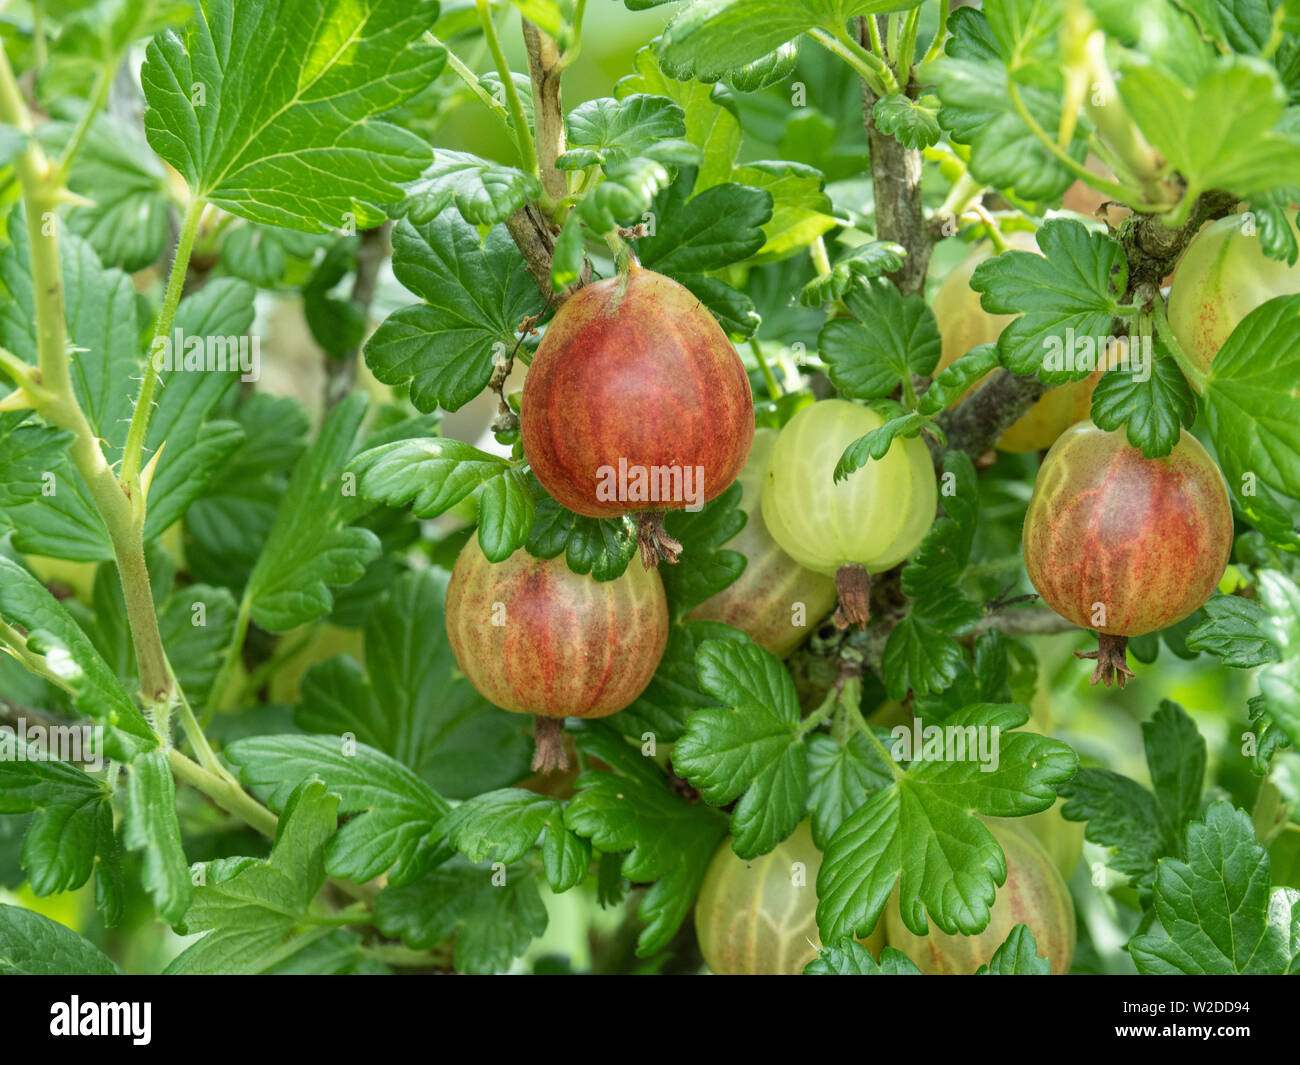 Part of a bush of the gooseberry Xenia showing a mixture of ripe and ripening fruit Stock Photo